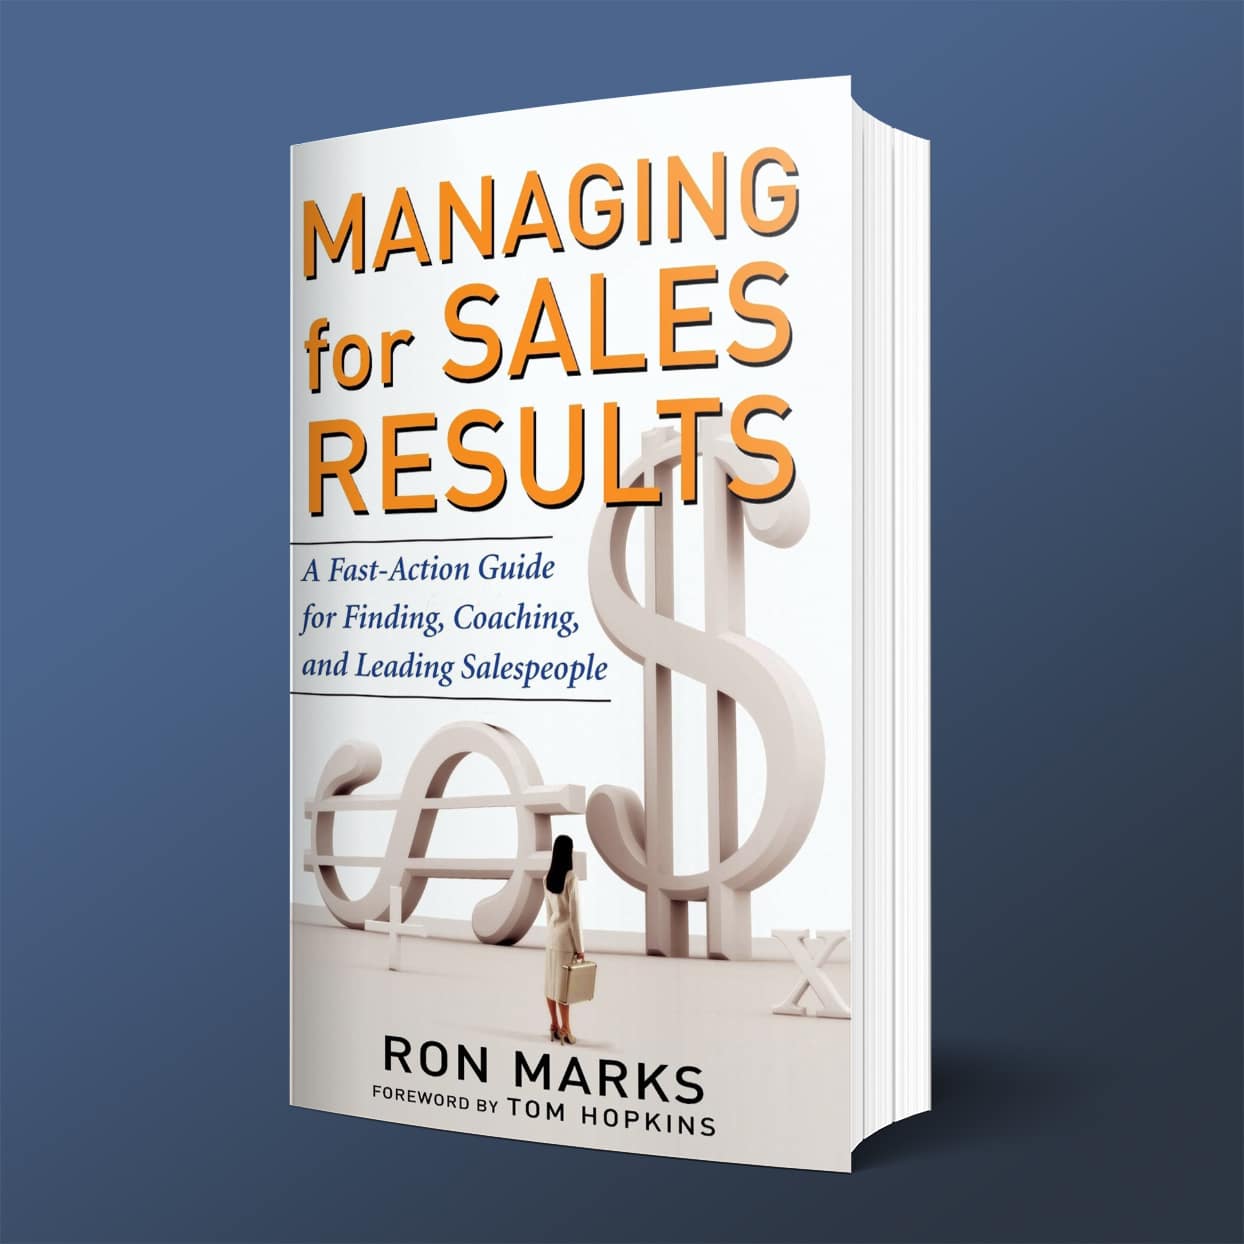 Managing for Sales Results by Ron Marks